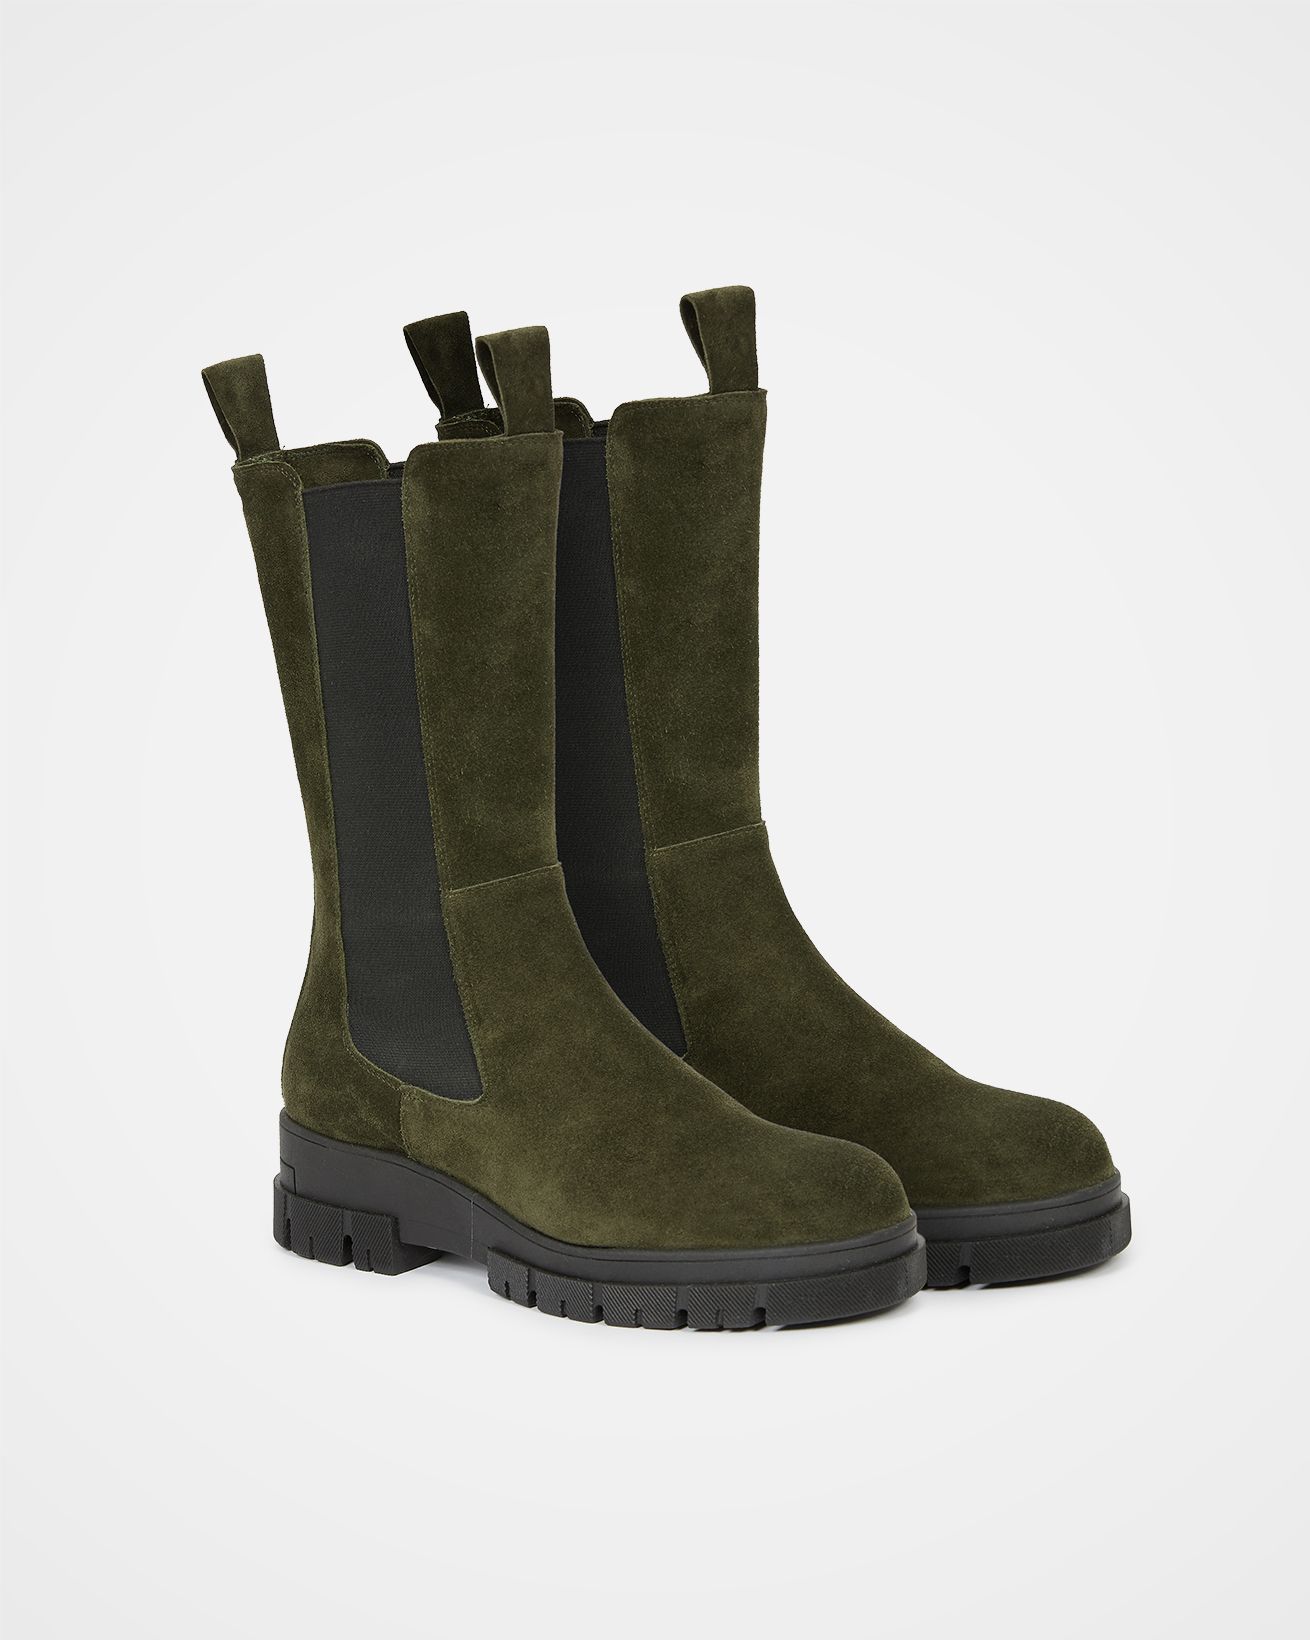 7842_chunky-tall-chelsea-boot-olive-suede_pair_web.jpg